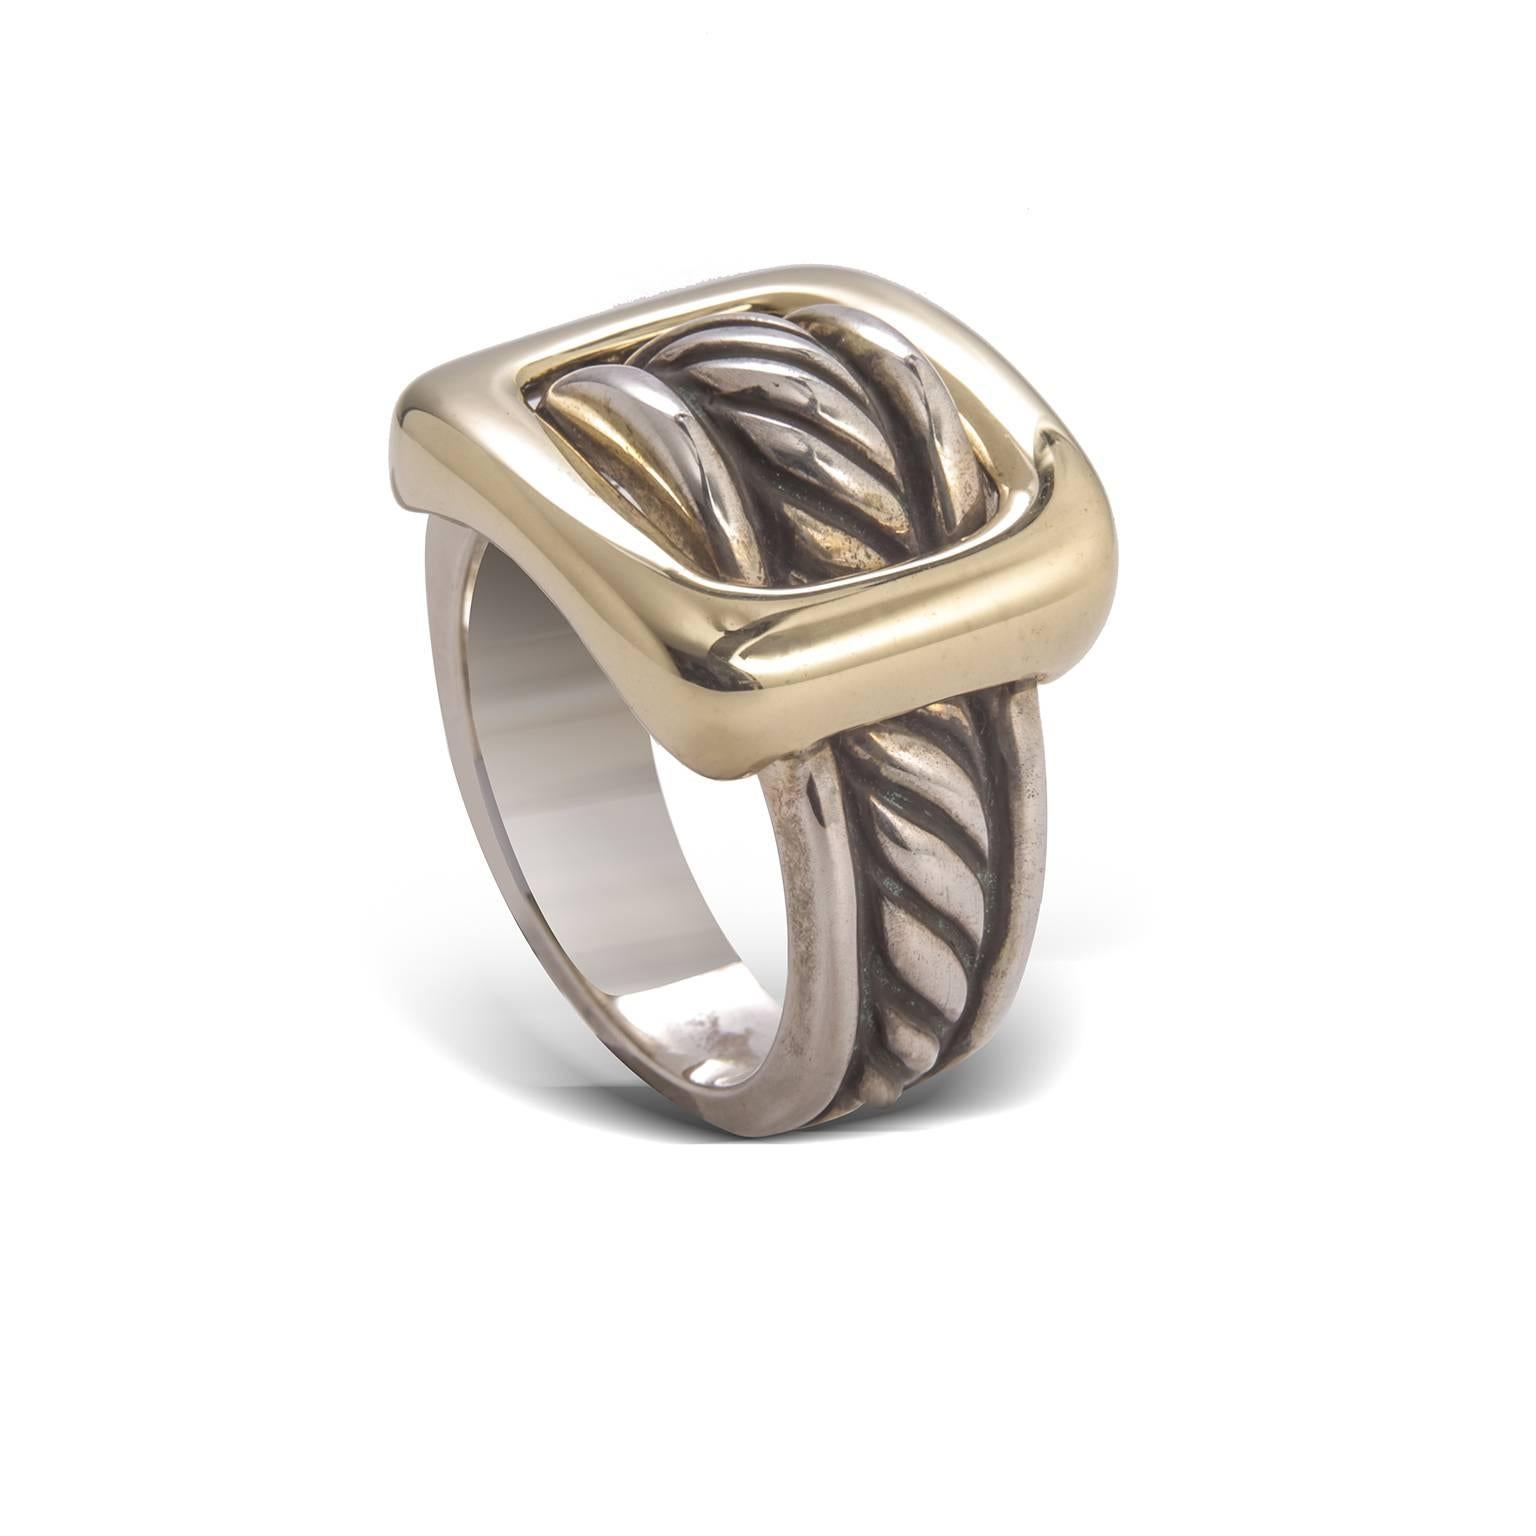 David Yurman Sterling Silver Yellow Gold Buckle Ring Size 6.75

Previously loved sterling silver and 18 karat yellow gold David Yurman Cable Buckle ring featuring a buckle motif.
It has been polished to look as new. 


